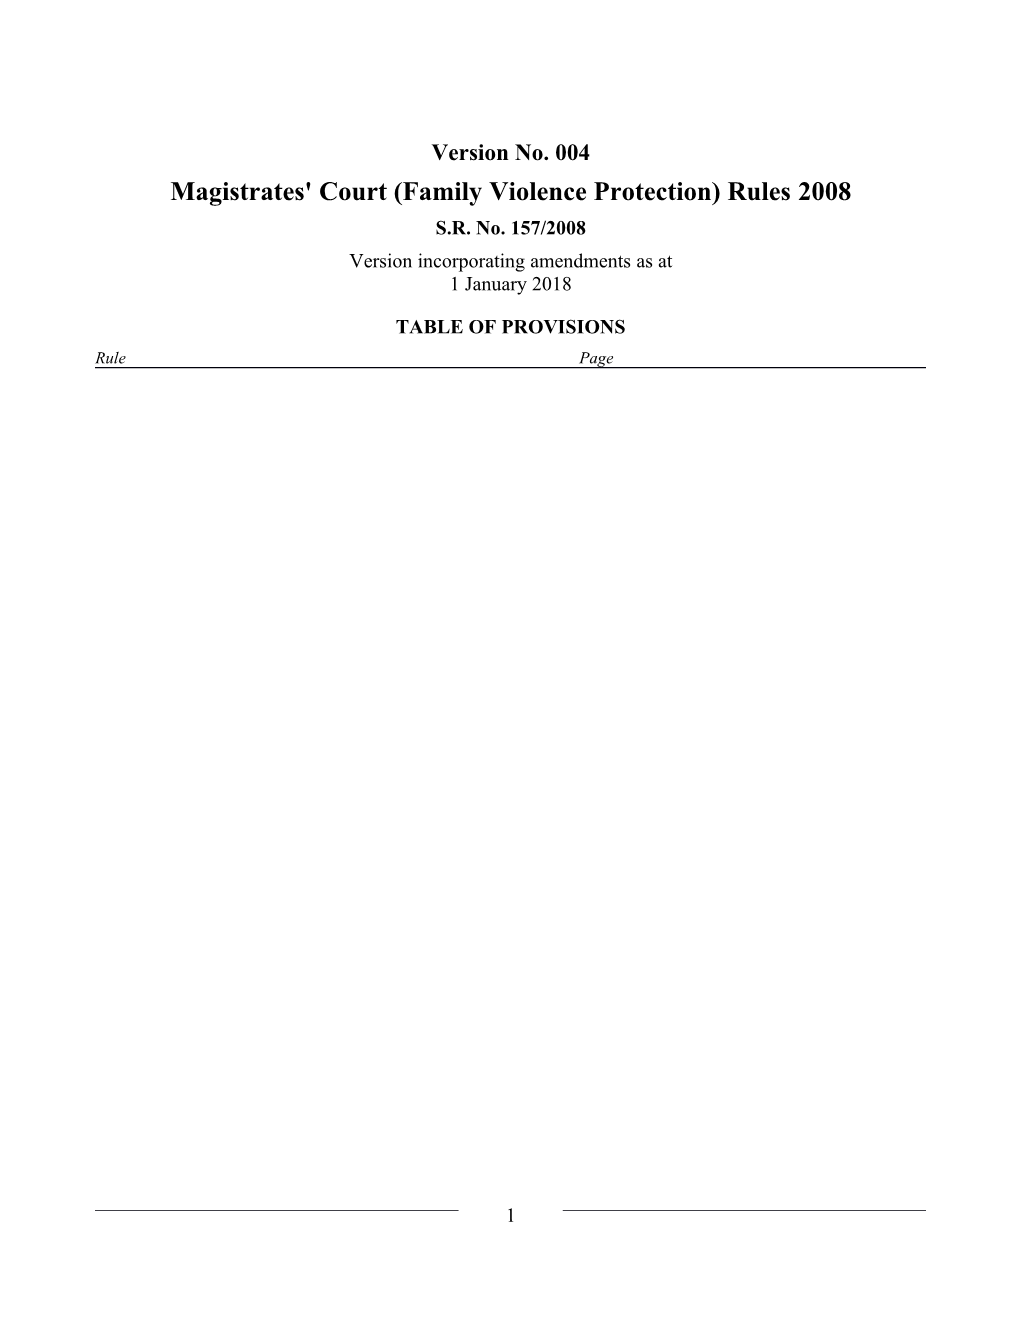 Magistrates' Court (Family Violence Protection) Rules 2008